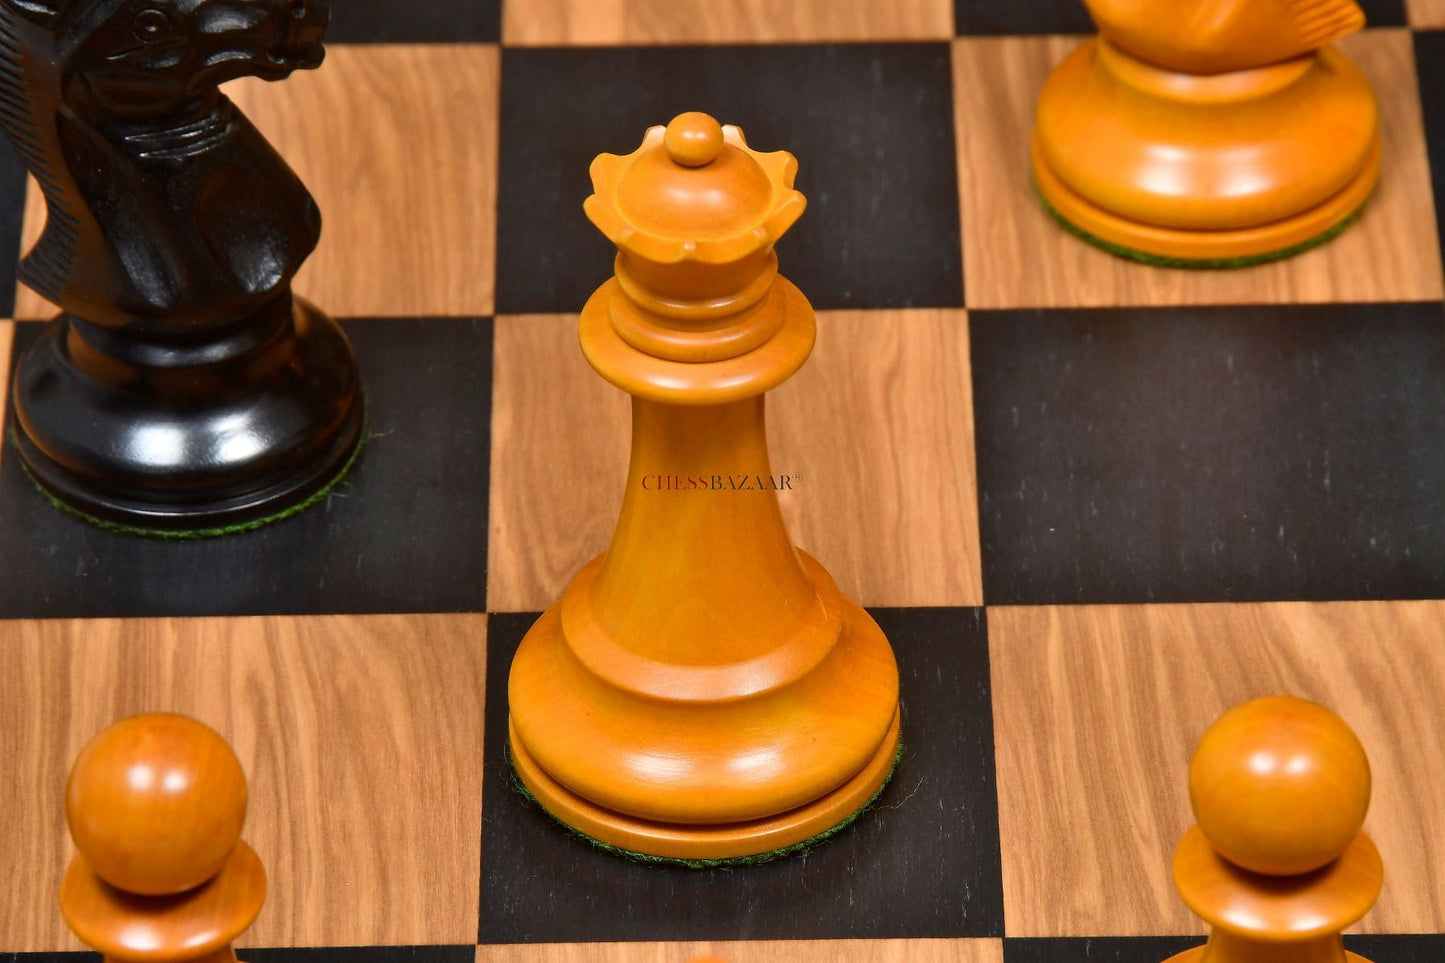 Reproduced Richard Whitty Antique Chess Pieces with King Side Stamping in Ebony / Antiqued Box wood - 3.75" King